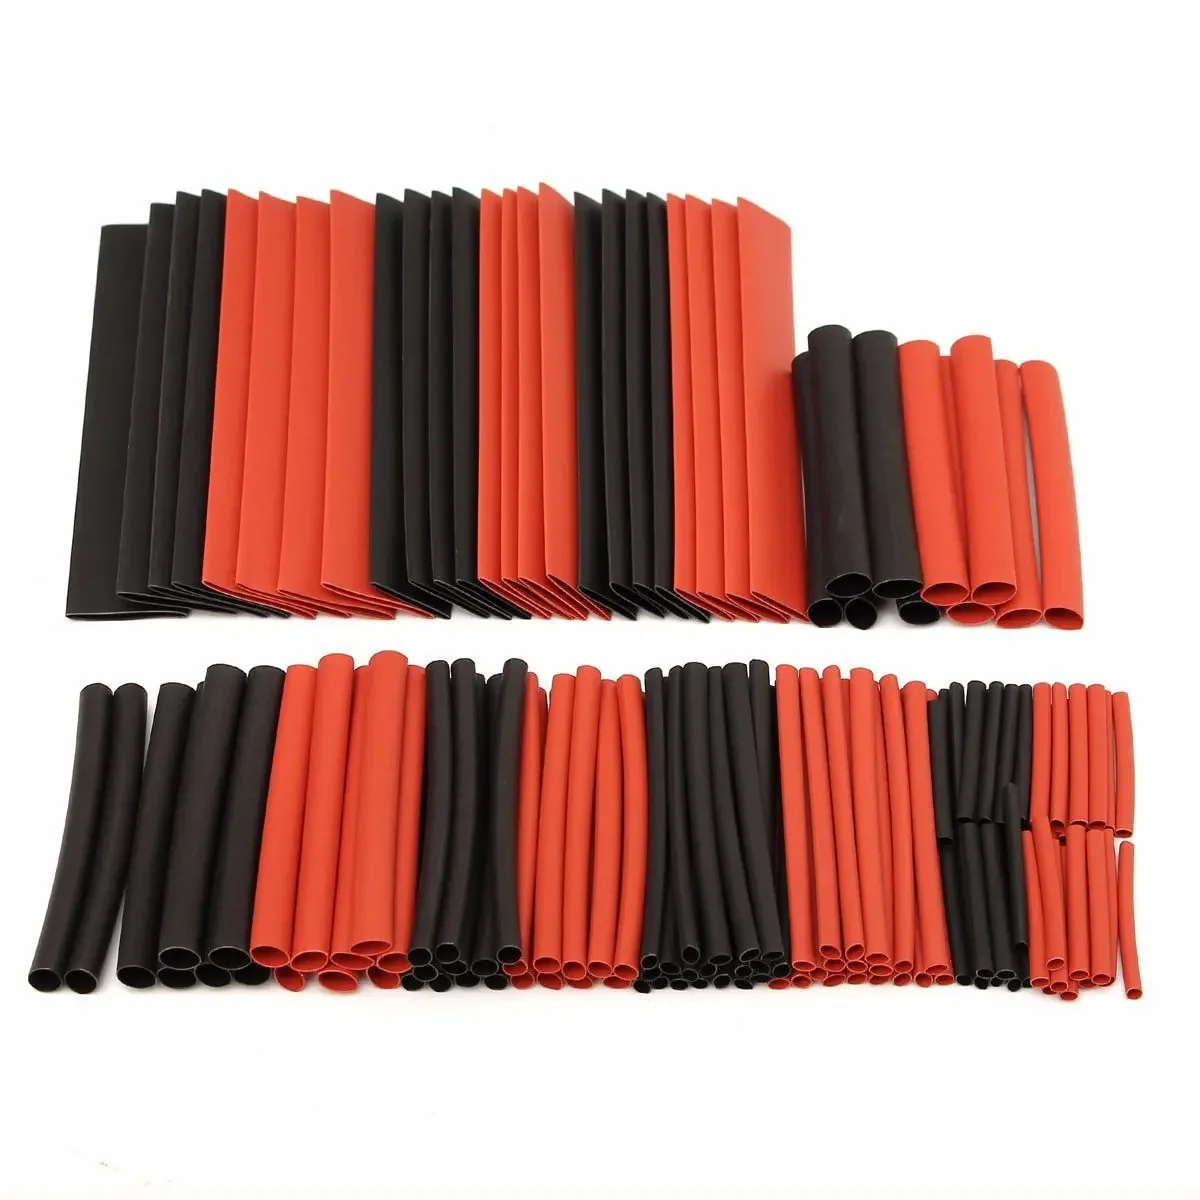 150pcs Insulation Heat Shrink Tube Shrink Wrapping, Heat Shrinkable for Cables Thermoresistant Tube 2:1 Shrinking Assorted Kit